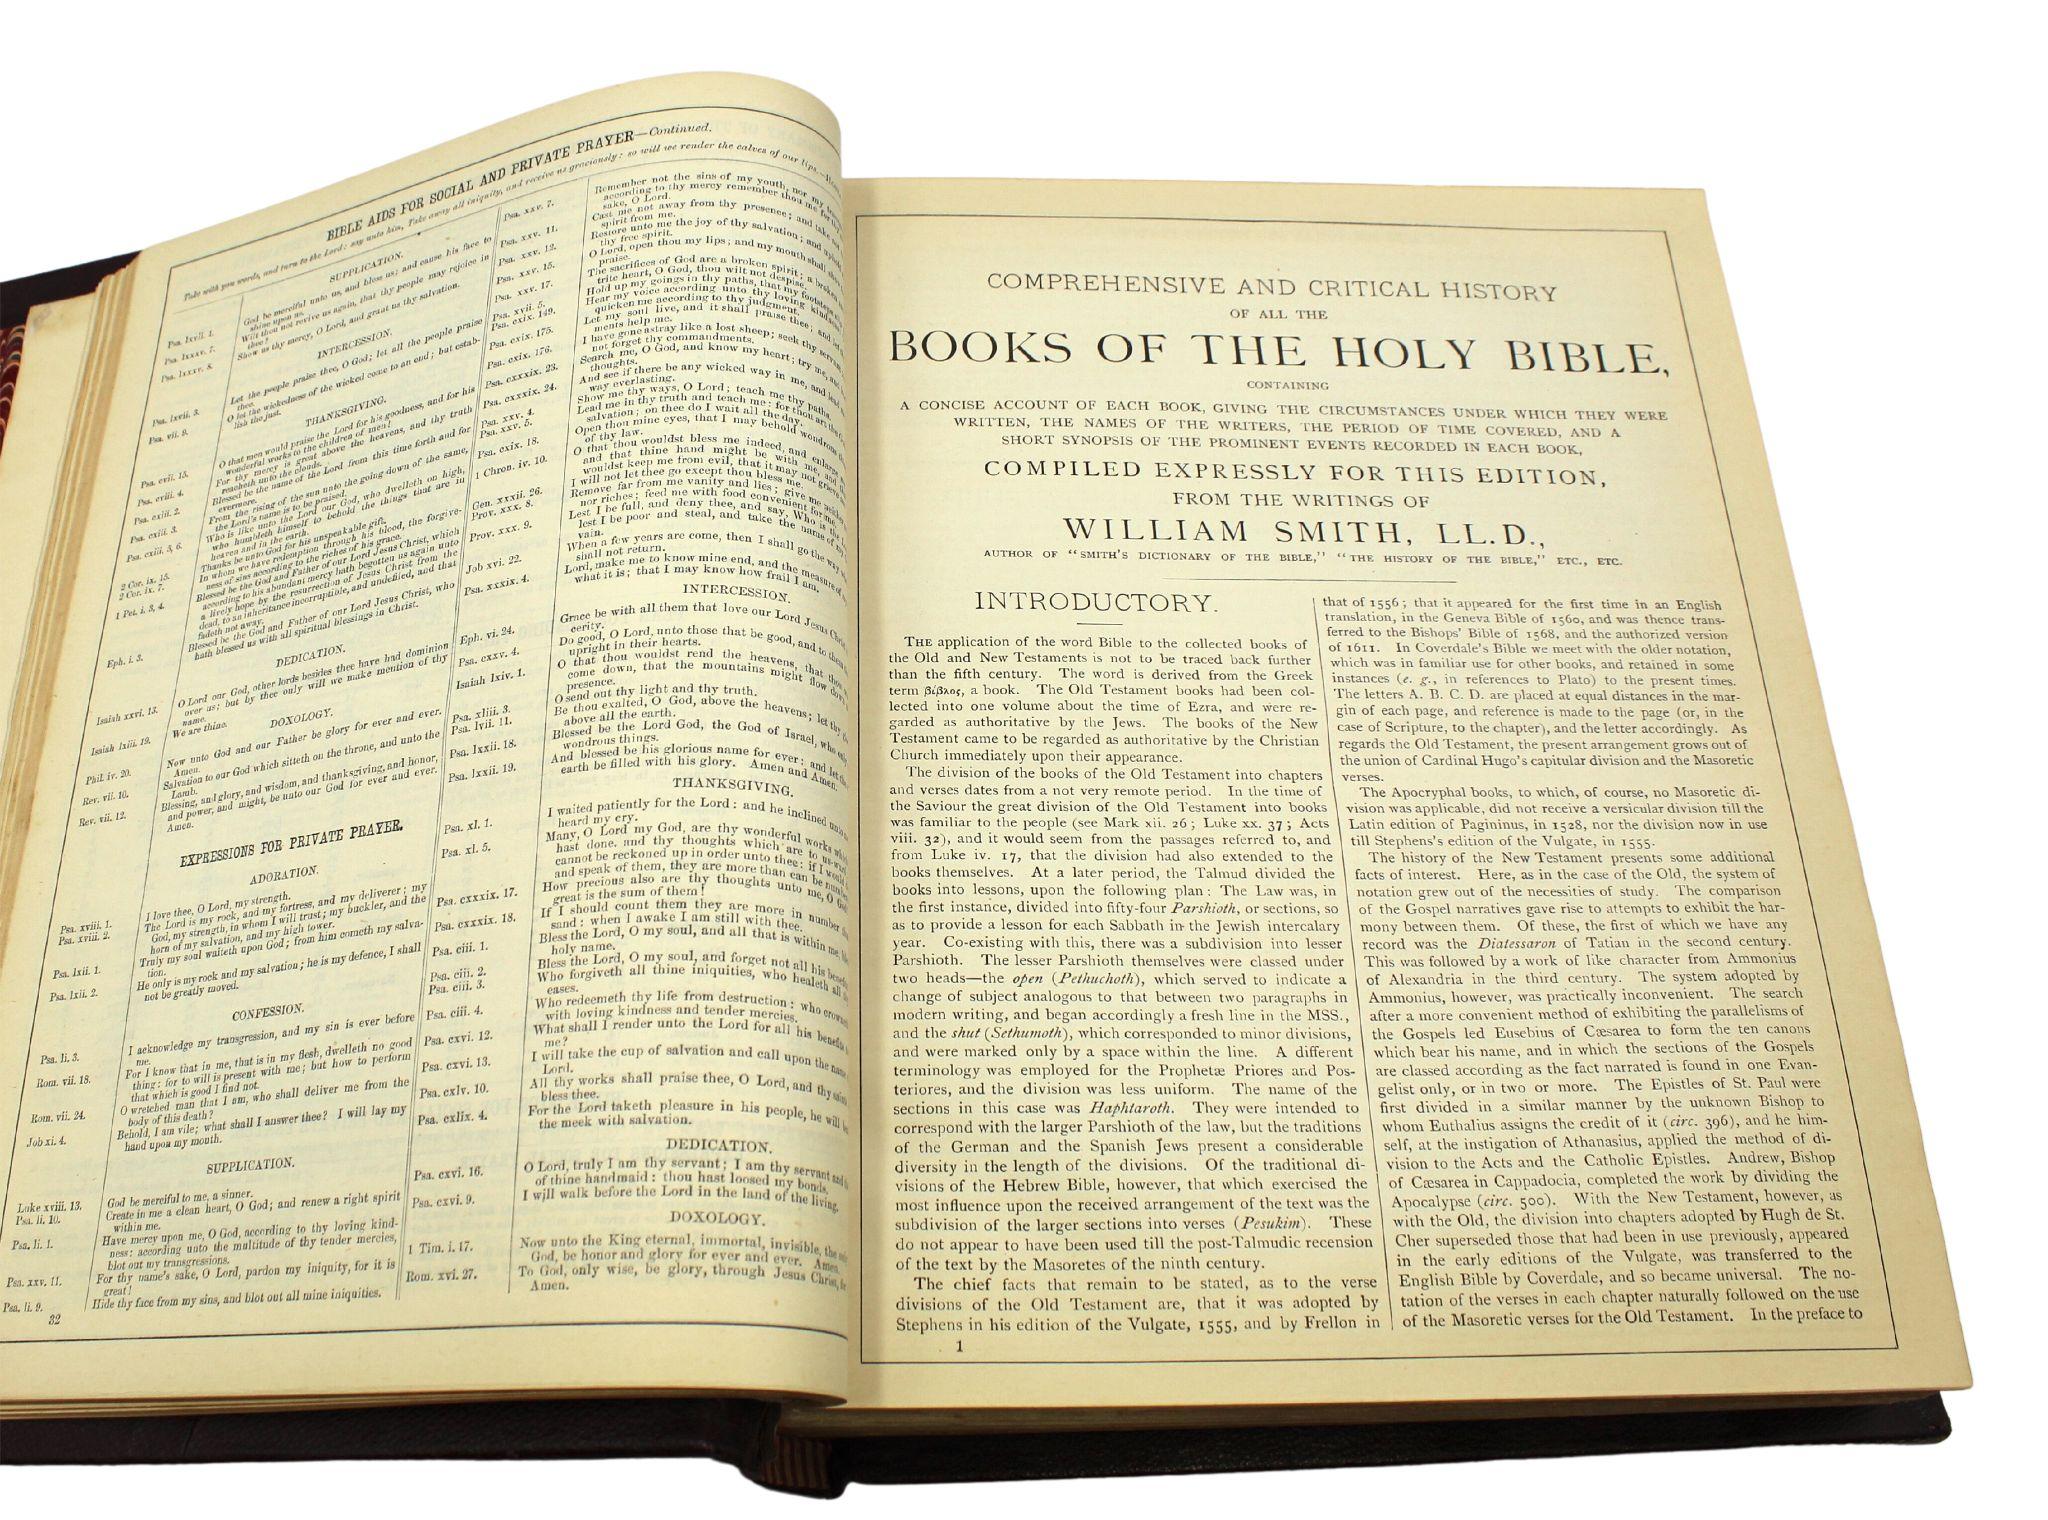 The Holy Bible, Containing the Old and New Testaments, Illustrated, 1885 4